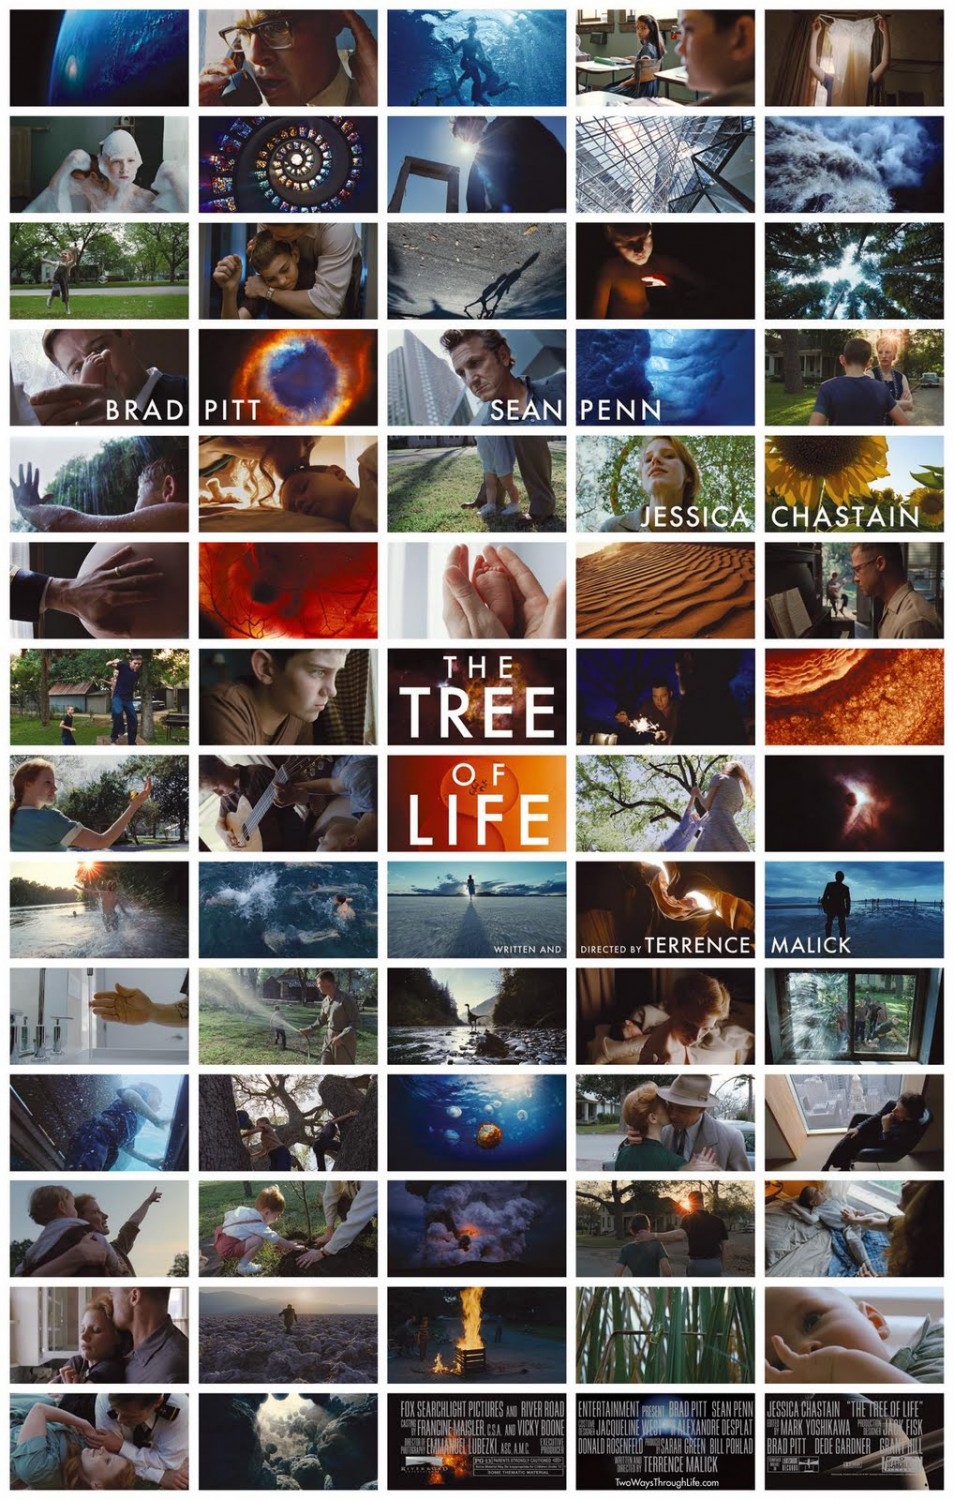 Extra Large Movie Poster Image for The Tree of Life (#2 of 7)